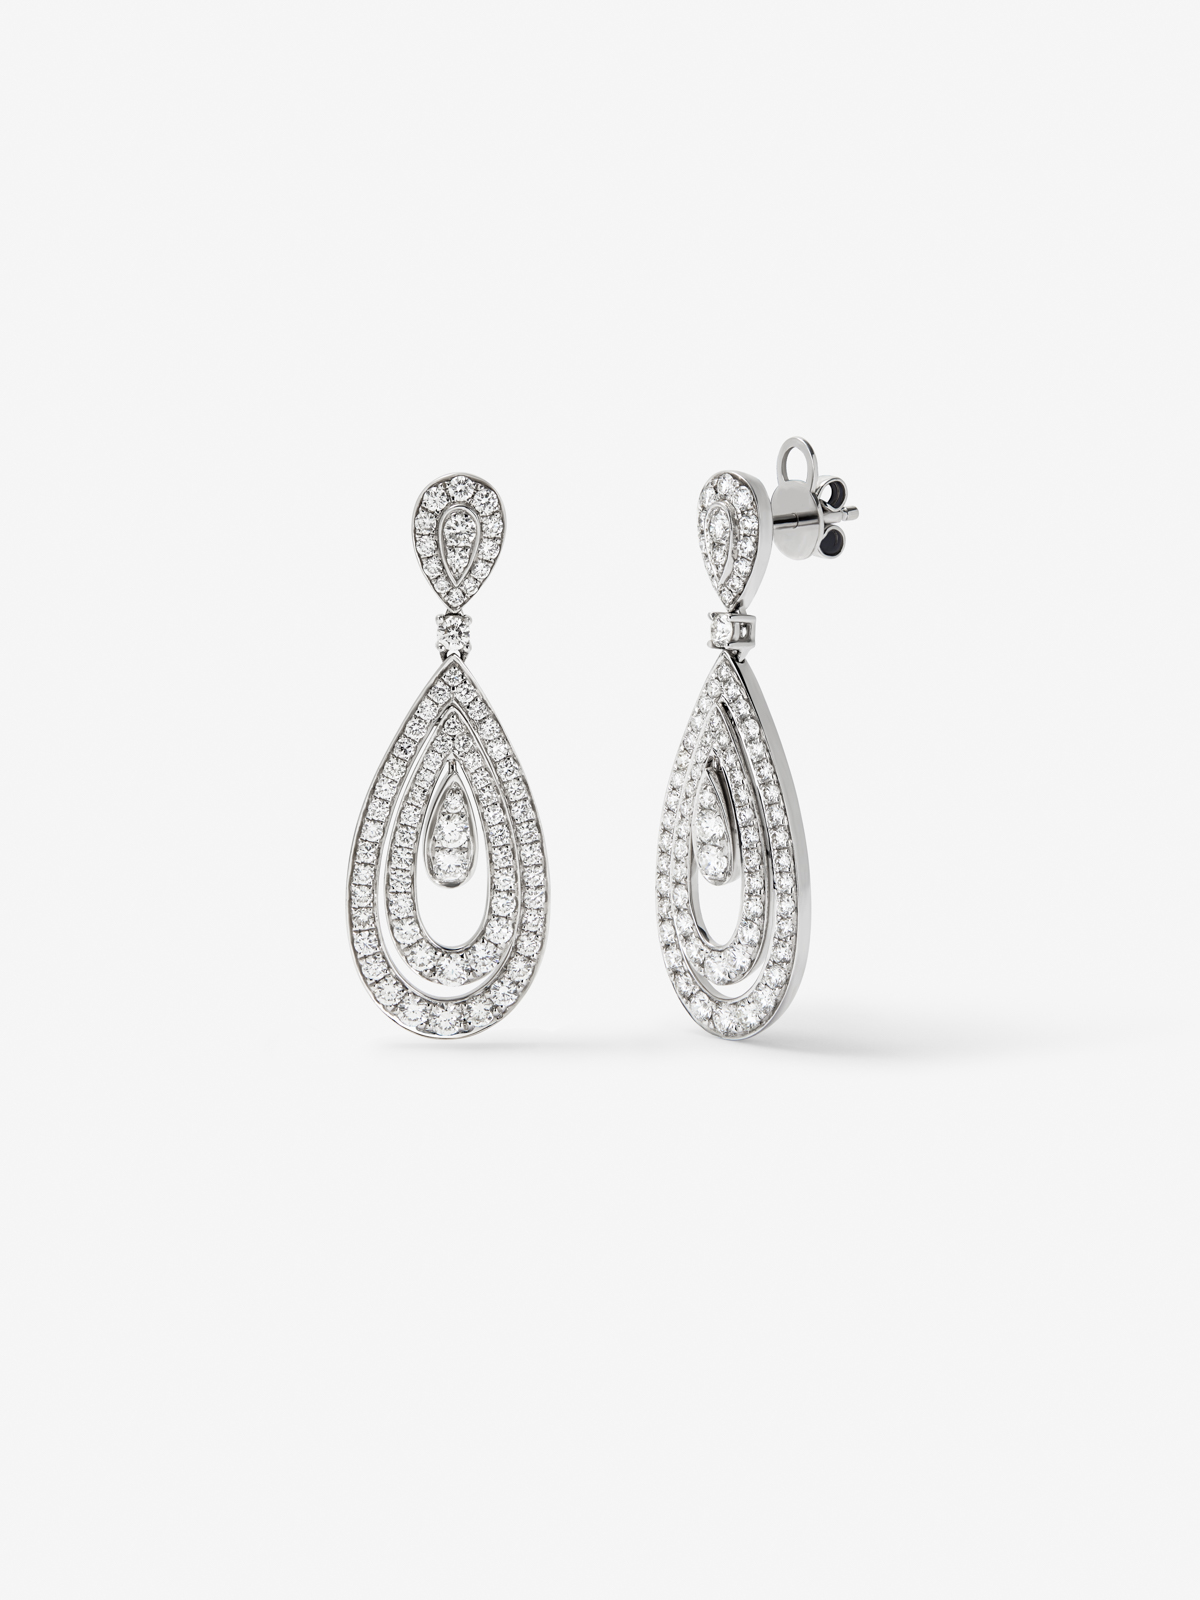 18K white gold earrings with white 2.5 cts bright diamonds